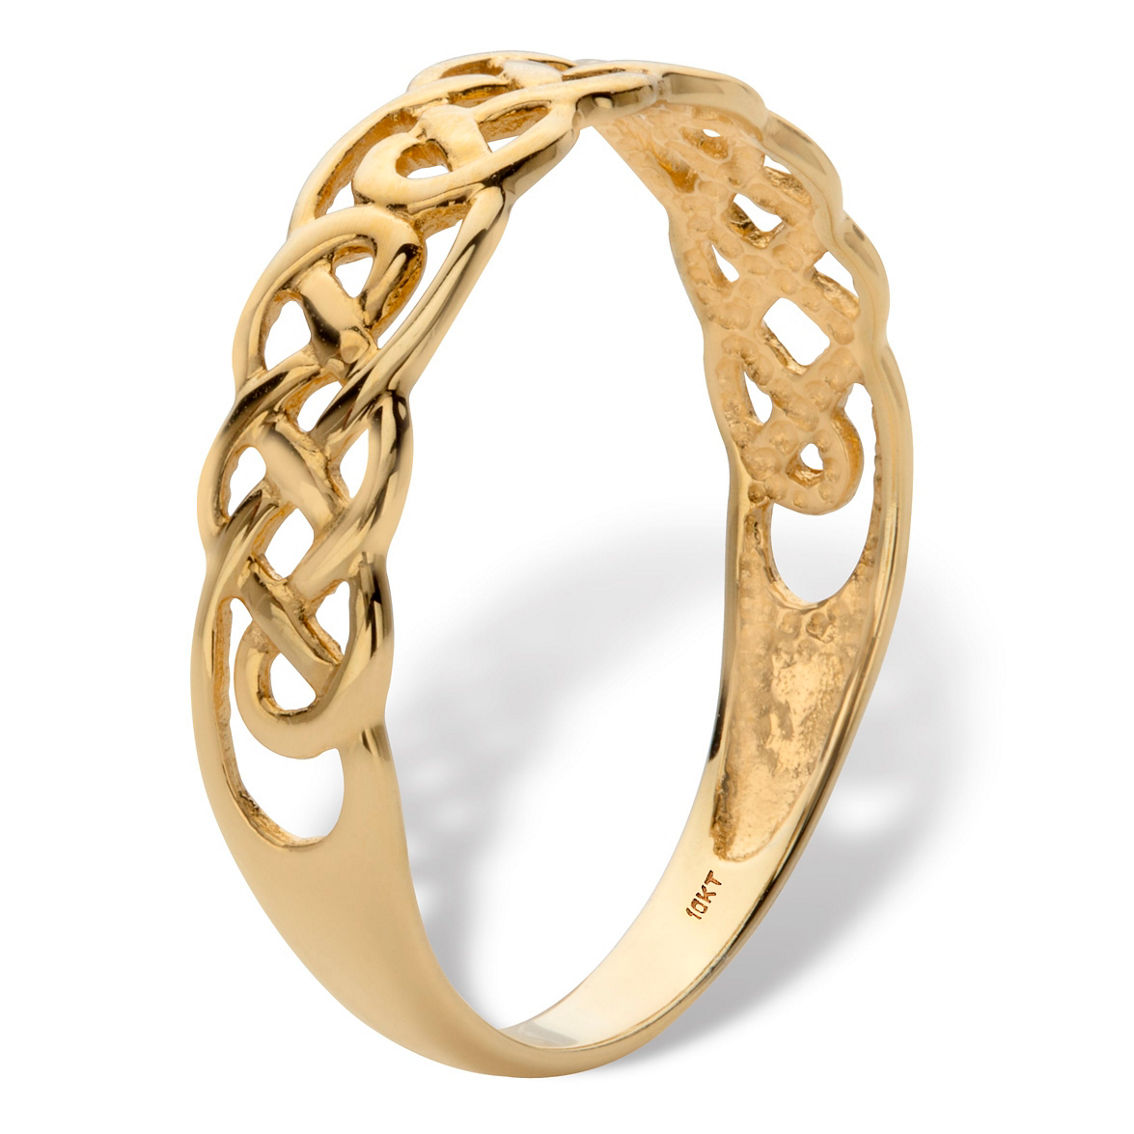 PalmBeach Celtic Weave Solid 10k Yellow Gold Band - Image 2 of 5